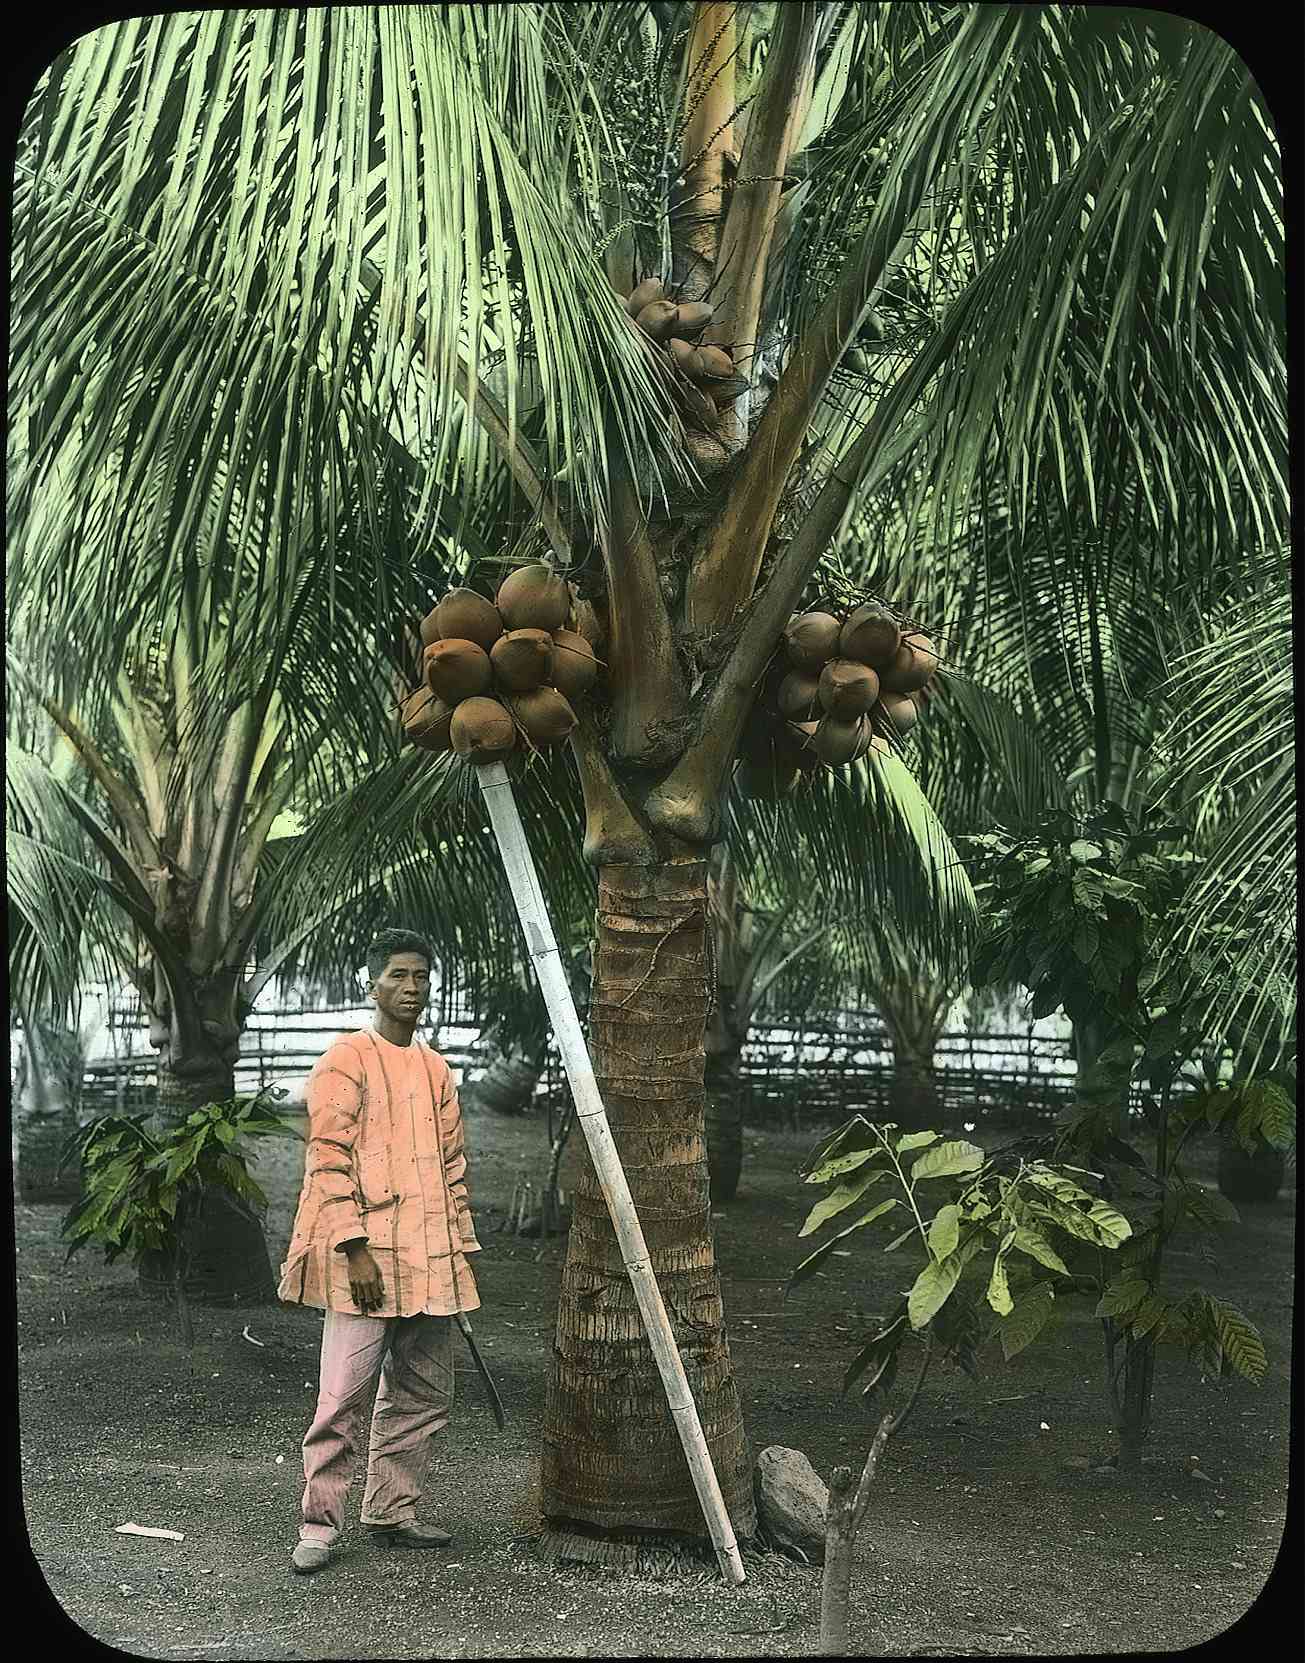 An indigenous Filipino man stands underneath a coconut tree. There are three bundles of coconuts at the top. A long bamboo stick is being used to prop up a cluster of coconuts almost directly above the man.